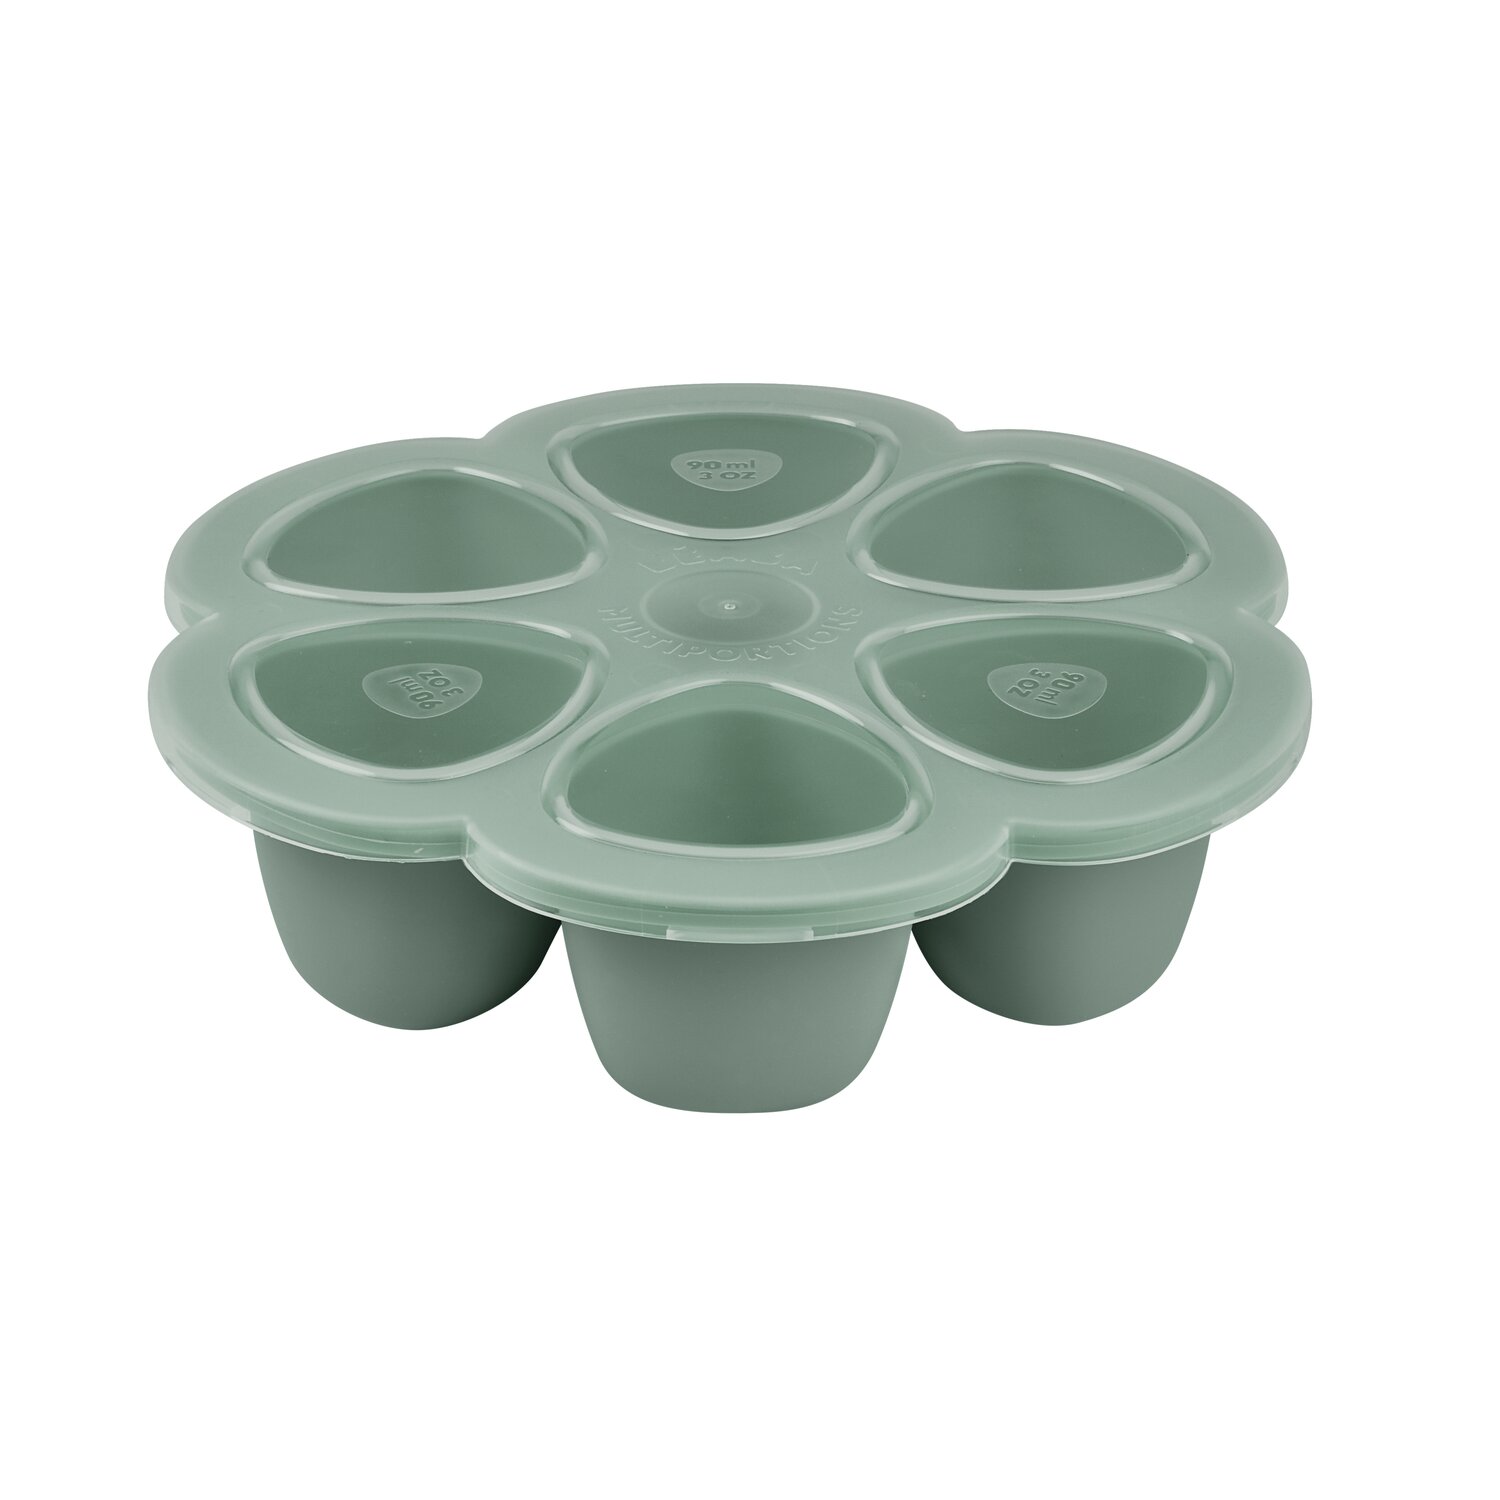 Multiportions silicone 6 x 90 ml sage green Béaba